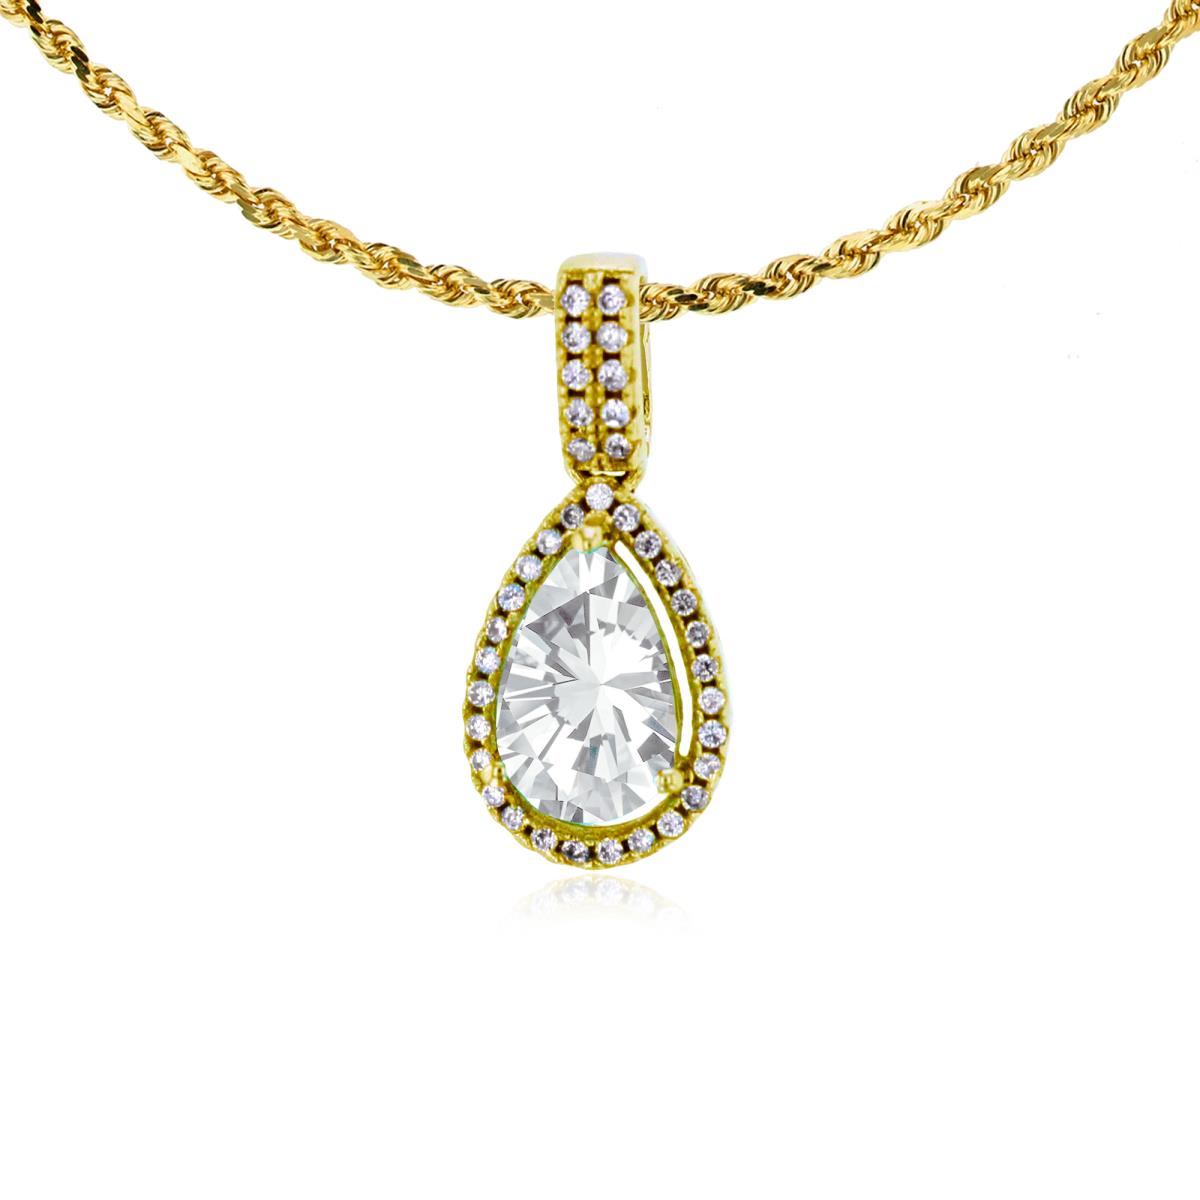 10K Yellow Gold 8x5mm Pear Cut White Topaz & 0.11 CTTW Diamond Halo 18" Rope Chain Necklace